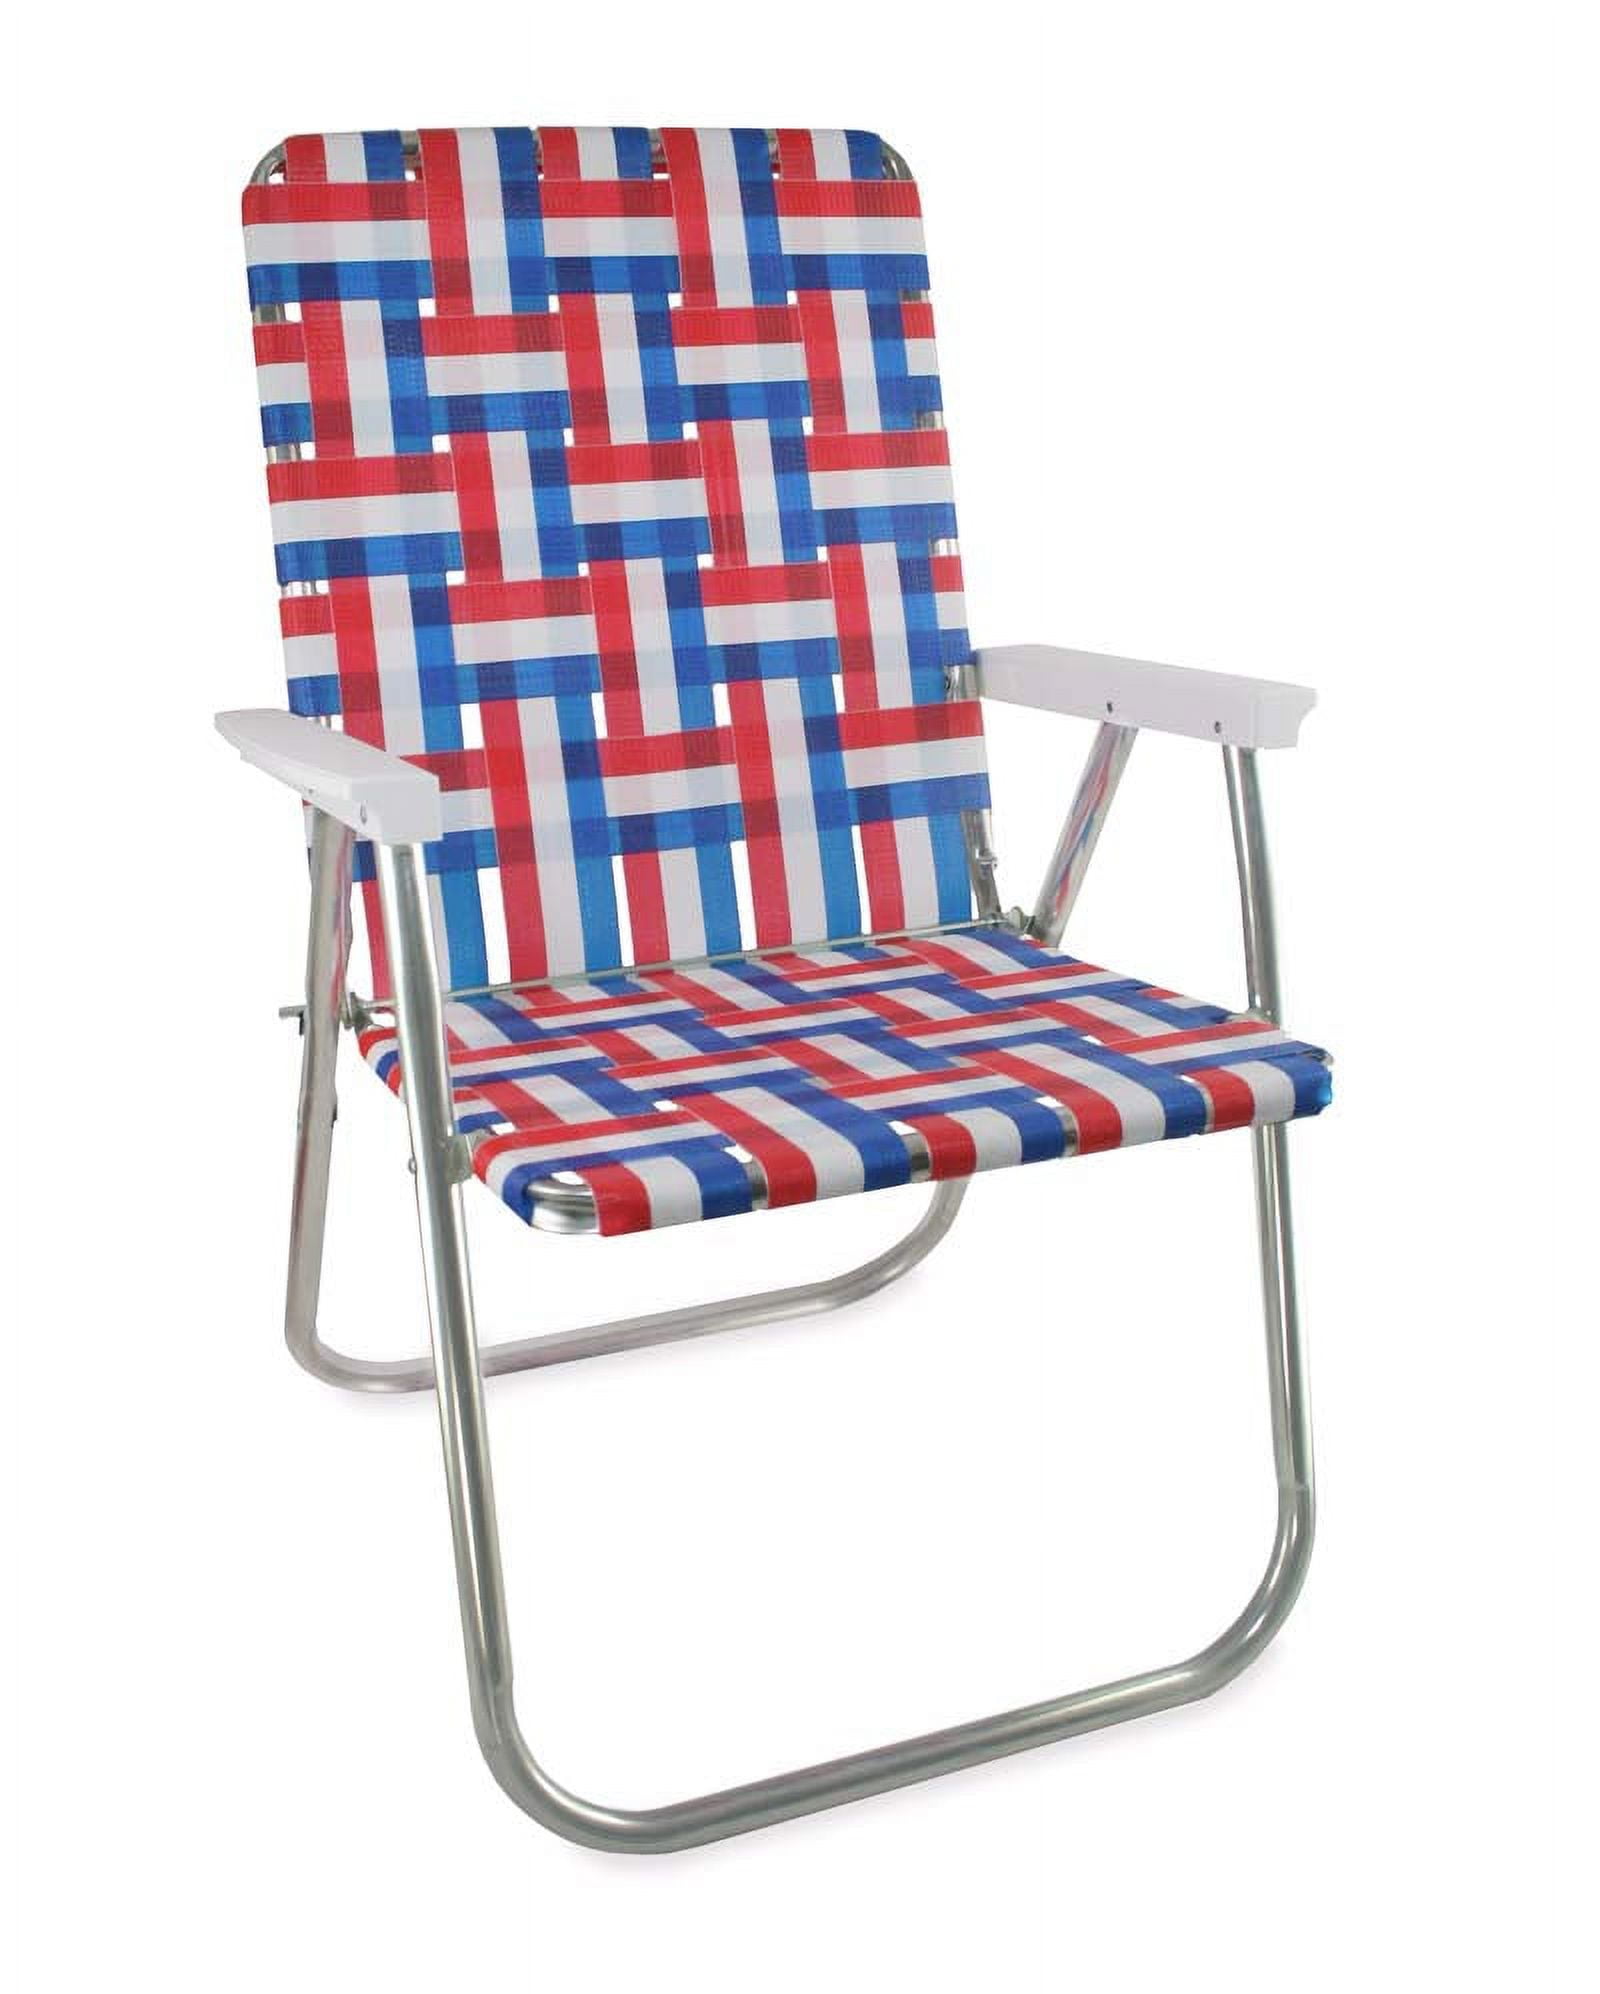 Lawn Chair USA Classic Folding Aluminum Webbed Chair | Old Glory with White Arms - image 1 of 7